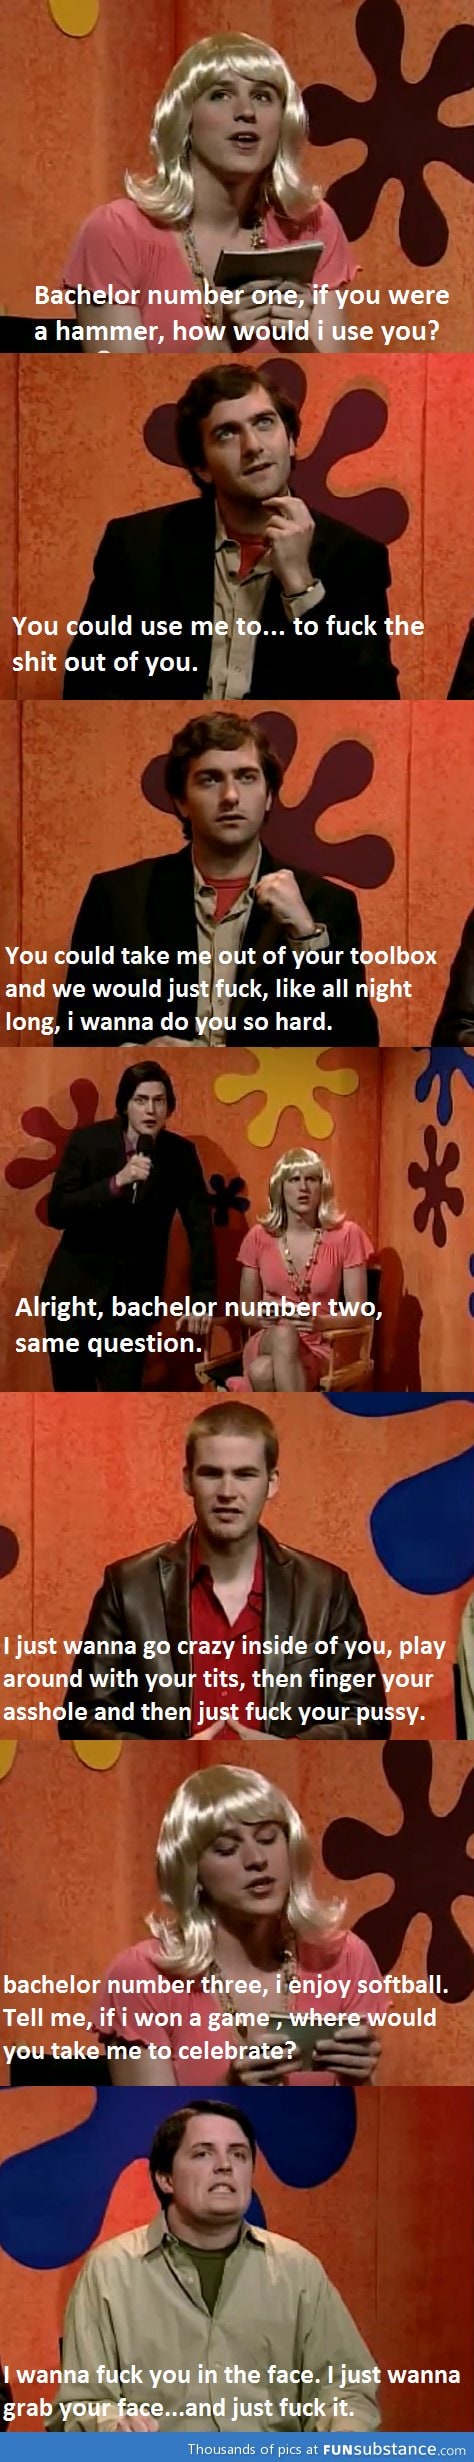 Dating show